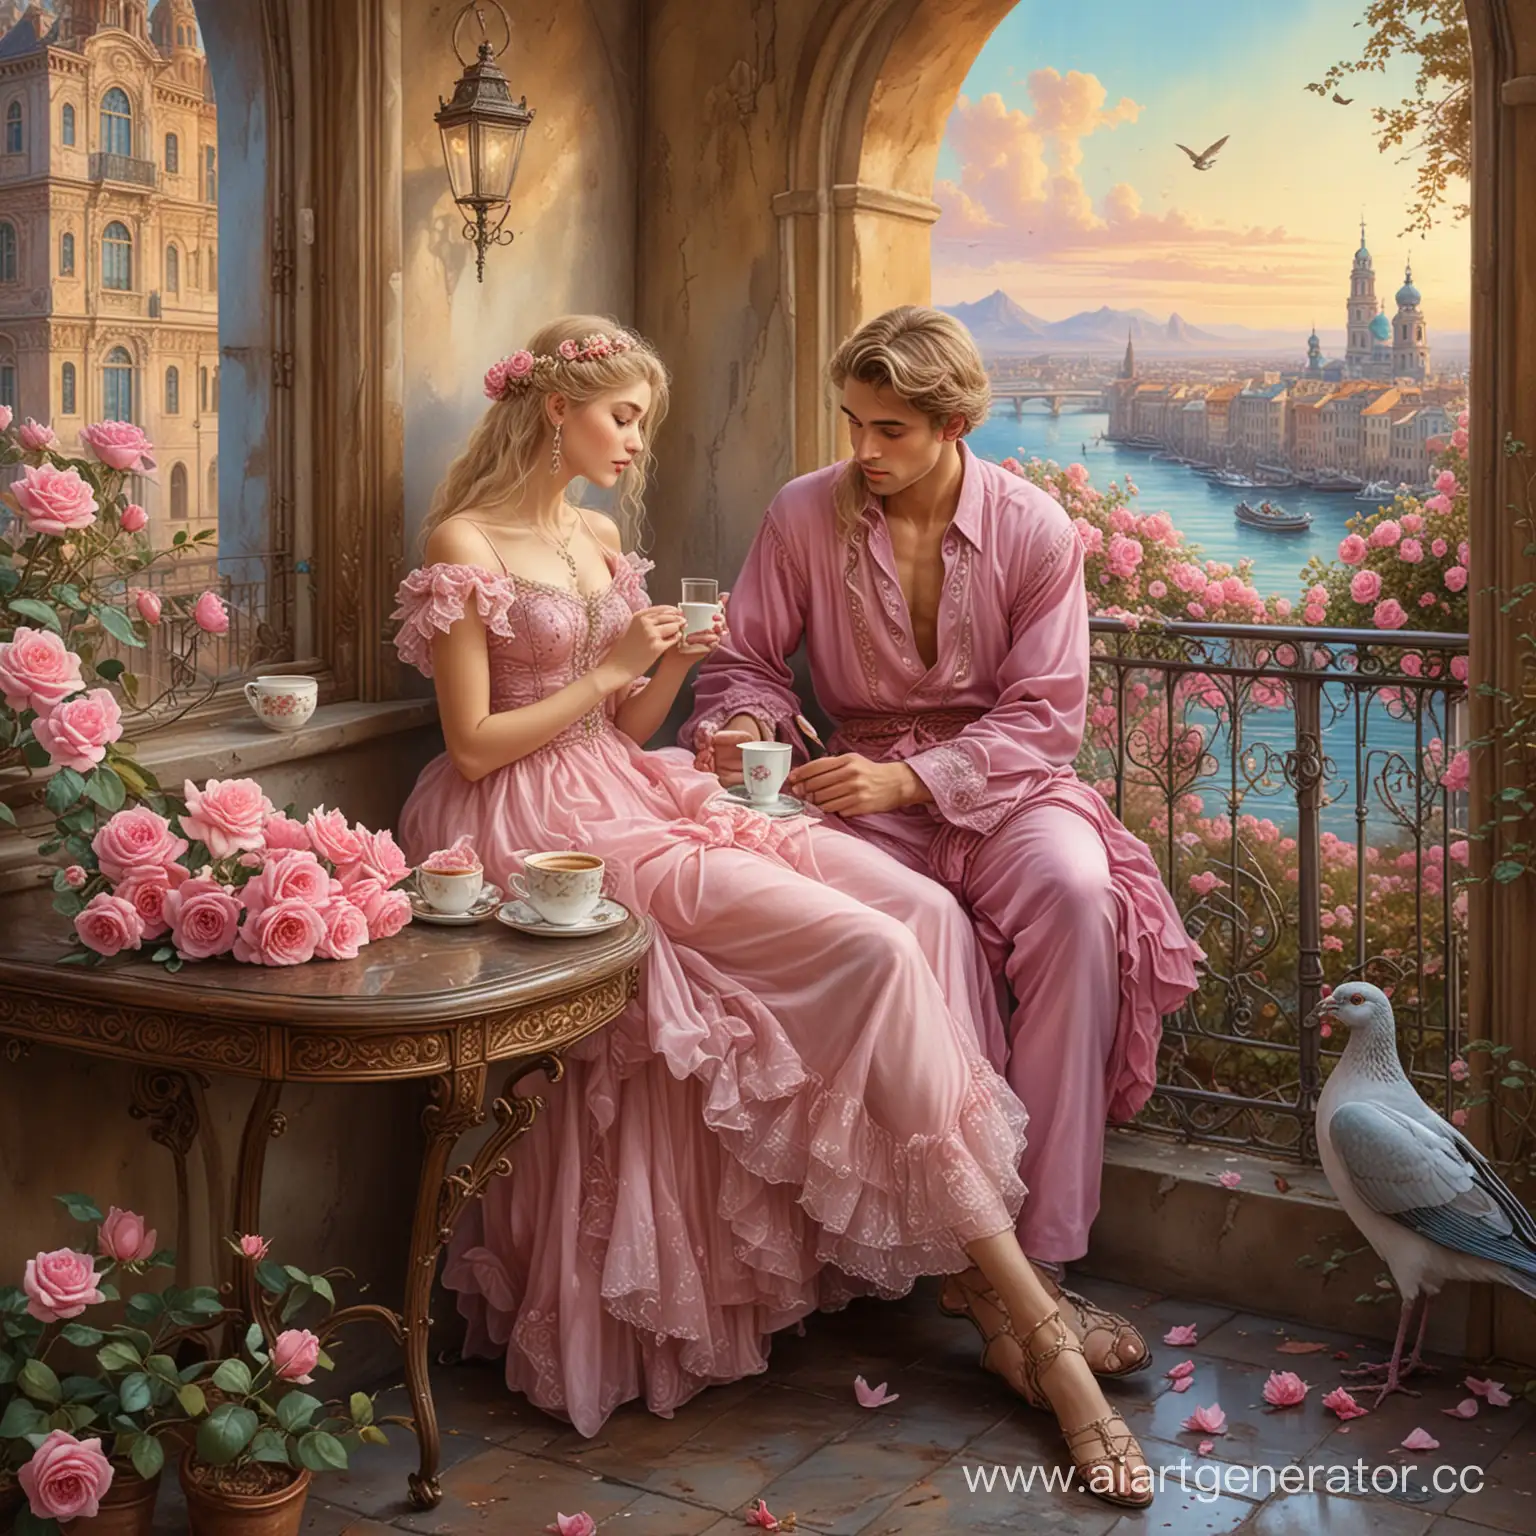 Romantic-Couple-Enjoying-Coffee-Amidst-Urban-Serenity-with-Pink-Roses